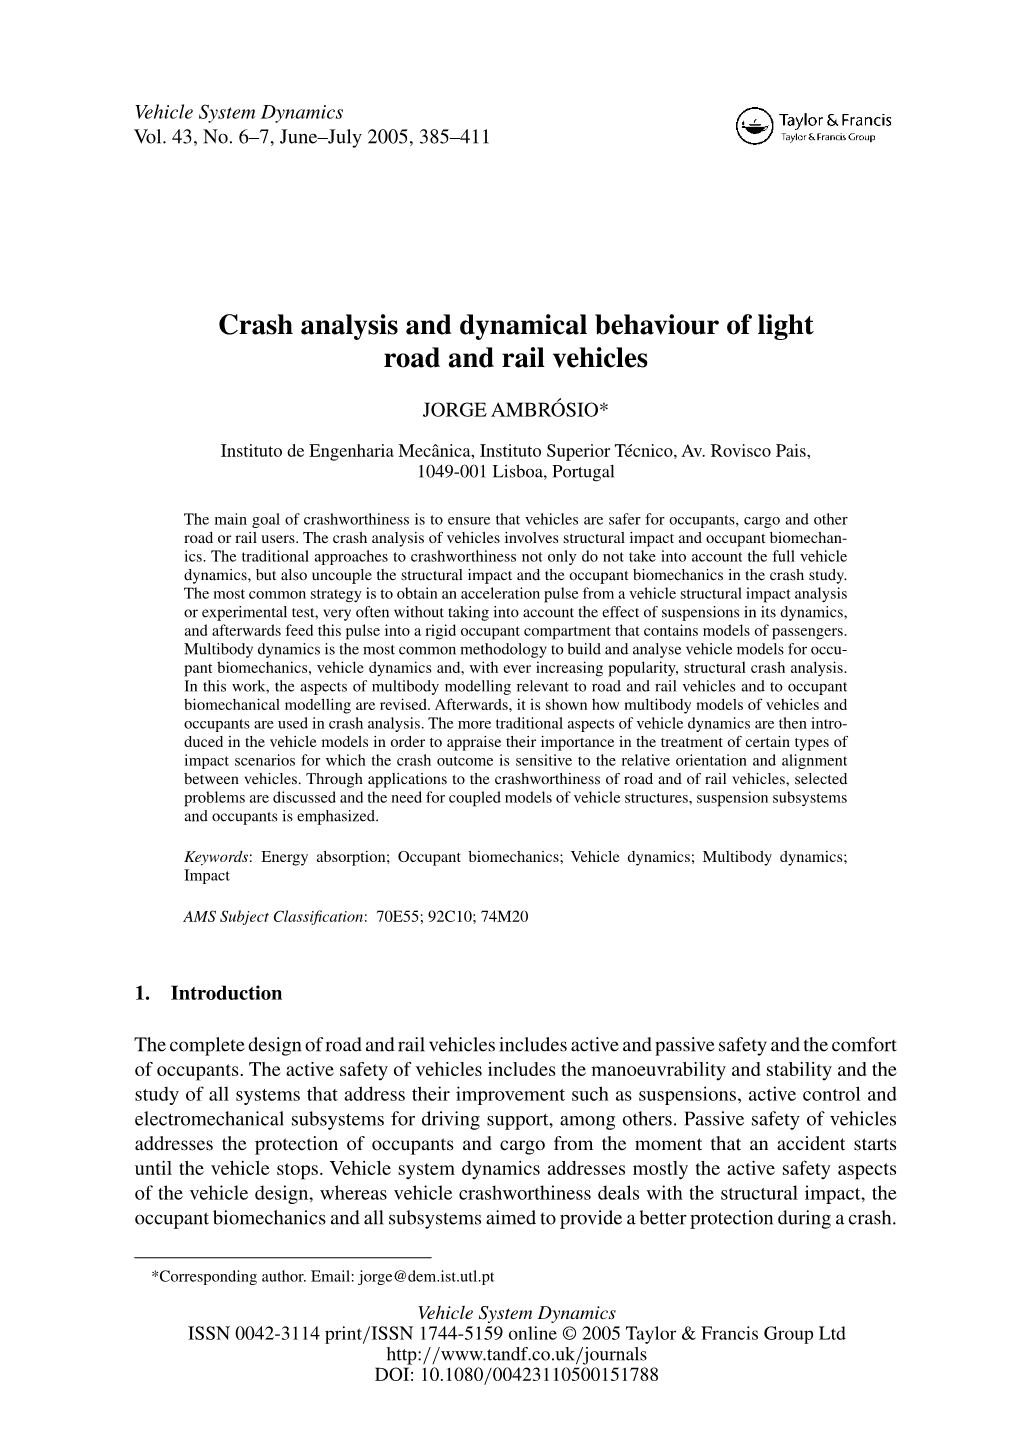 Crash Analysis and Dynamical Behaviour of Light Road and Rail Vehicles